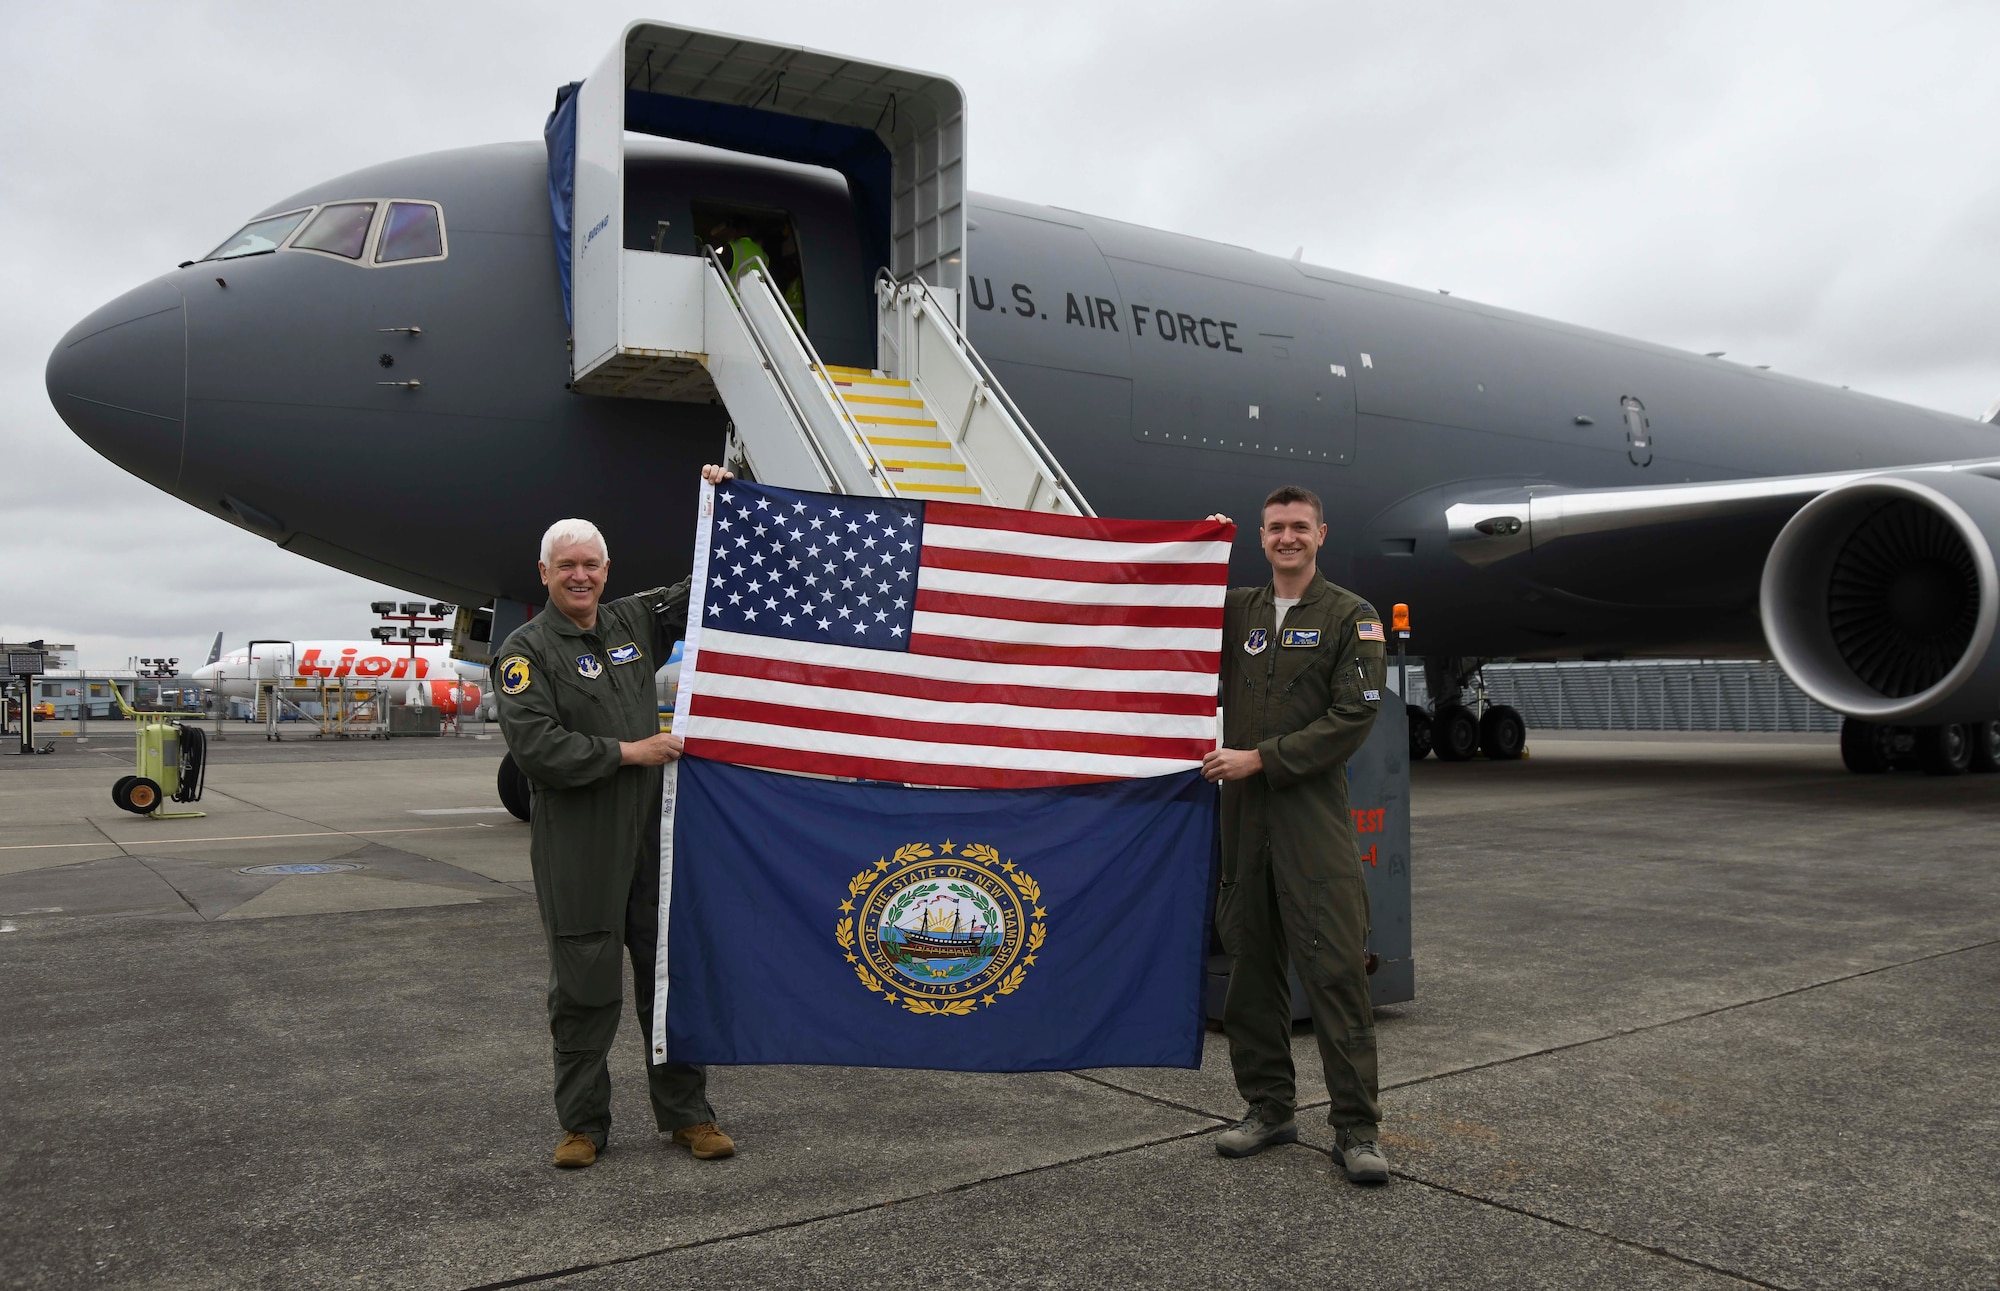 U.S. Air Force Lt. Gen. L. Scott Rice, left, director of the Air National Guard, and U.S. Air Force Capt. Lee
Rice, right, a pilot assigned to the 157th Air Refueling Wing, Pease Air National Guard Base, New
Hampshire, hold the flag of the United States and the state flag of New Hampshire in front of a KC-46A
Pegasus at the Boeing Distribution Center, Seattle, Wash., Aug. 8, 2019. This KC-46 was flown by the Rice
father-and-son duo to the aircraft’s newly assigned home station at the 157th ARW. (U.S. Air National
Guard photo by Staff Sgt. Morgan R. Lipinski)